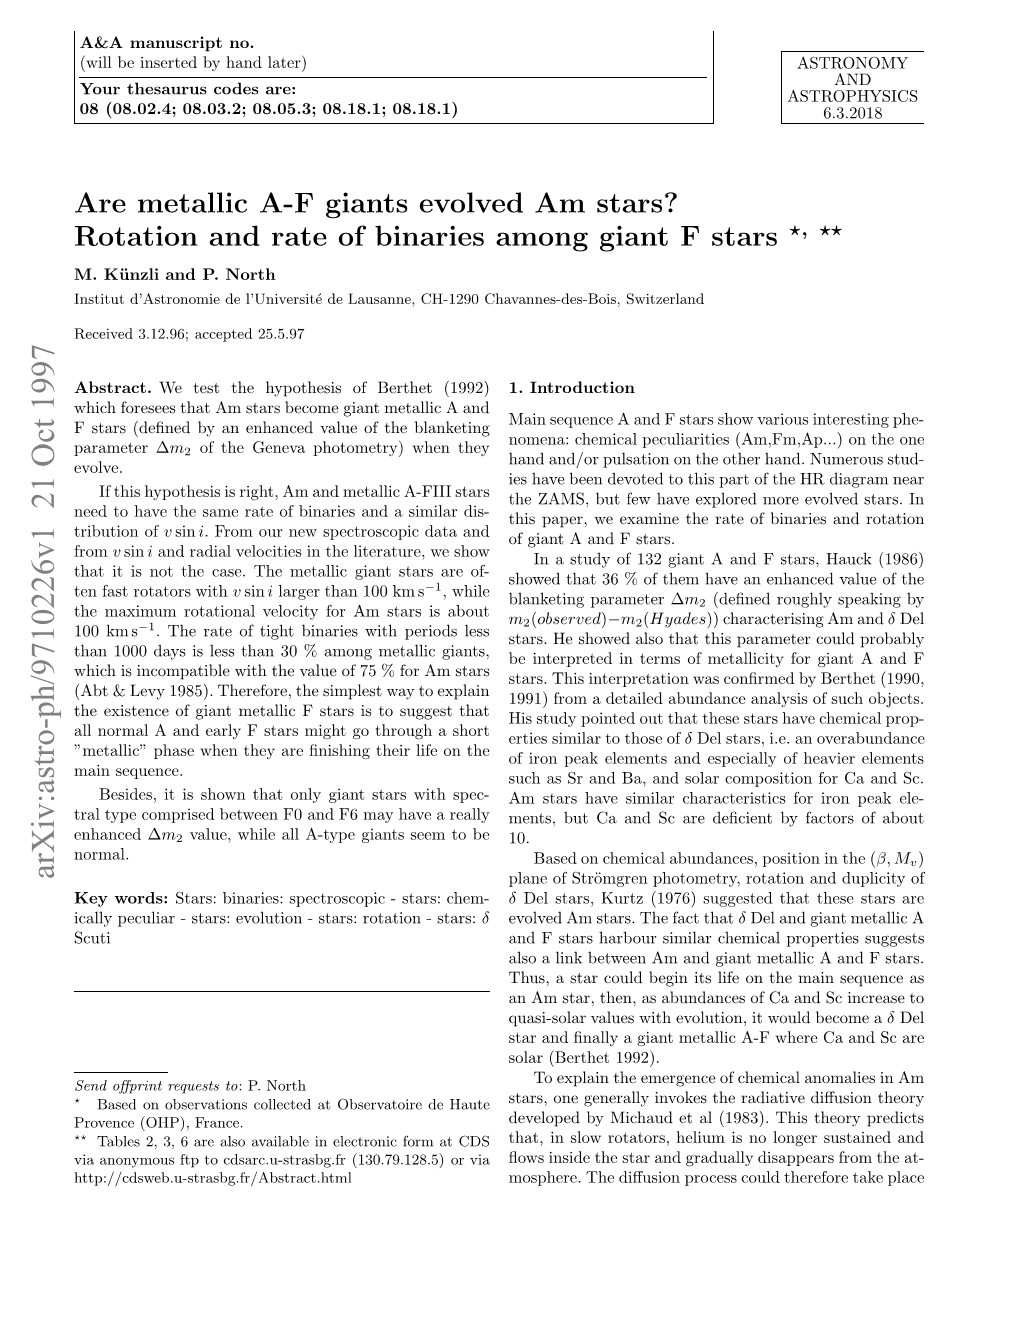 Are Metallic AF Giants Evolved Am Stars? Rotation and Rate of Binaries